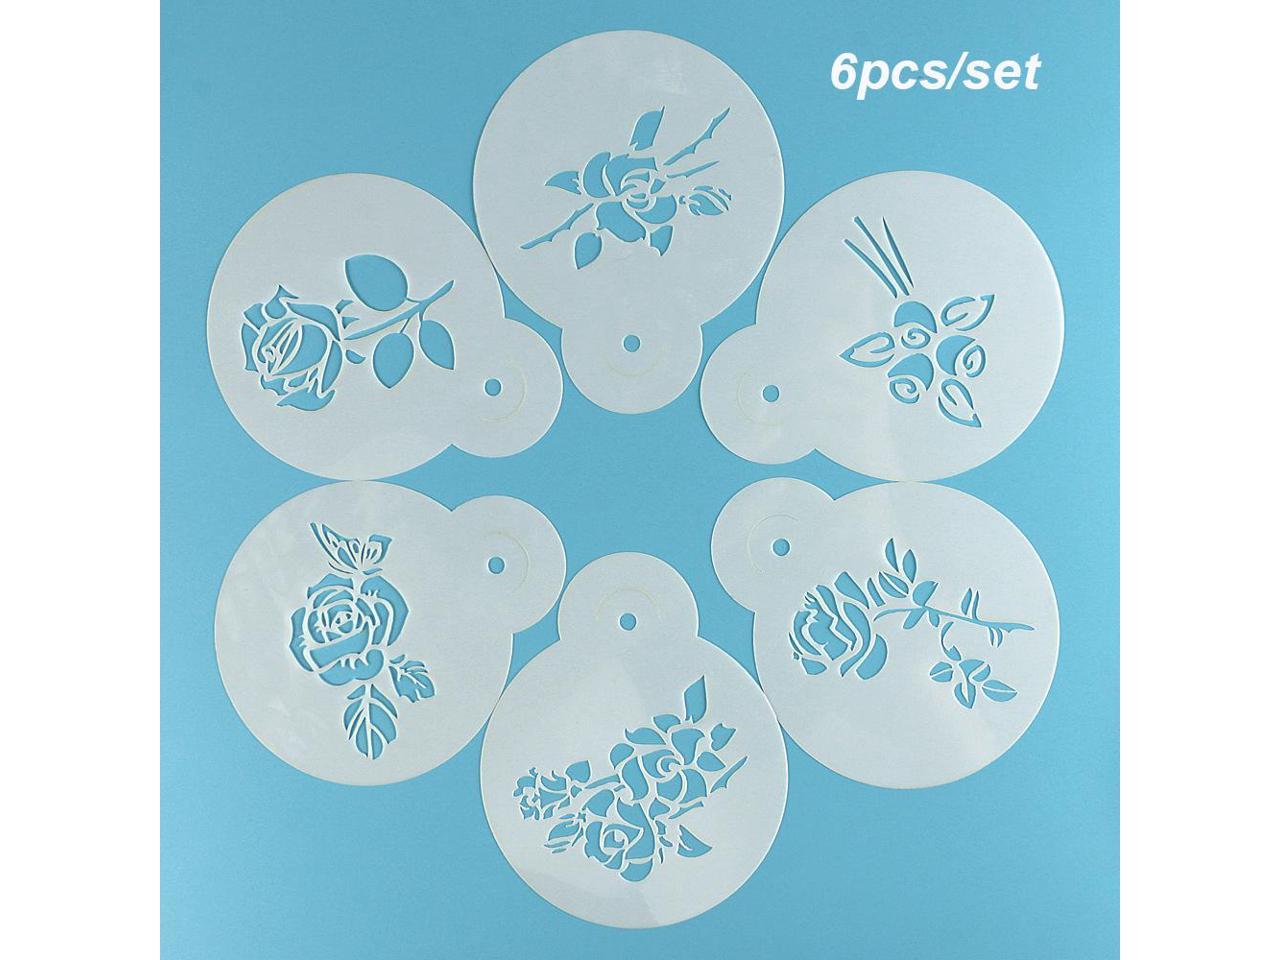 Details about   Mousse Flower Cake Stencil Cookies Fondant Molds Decorating Baking Tool 